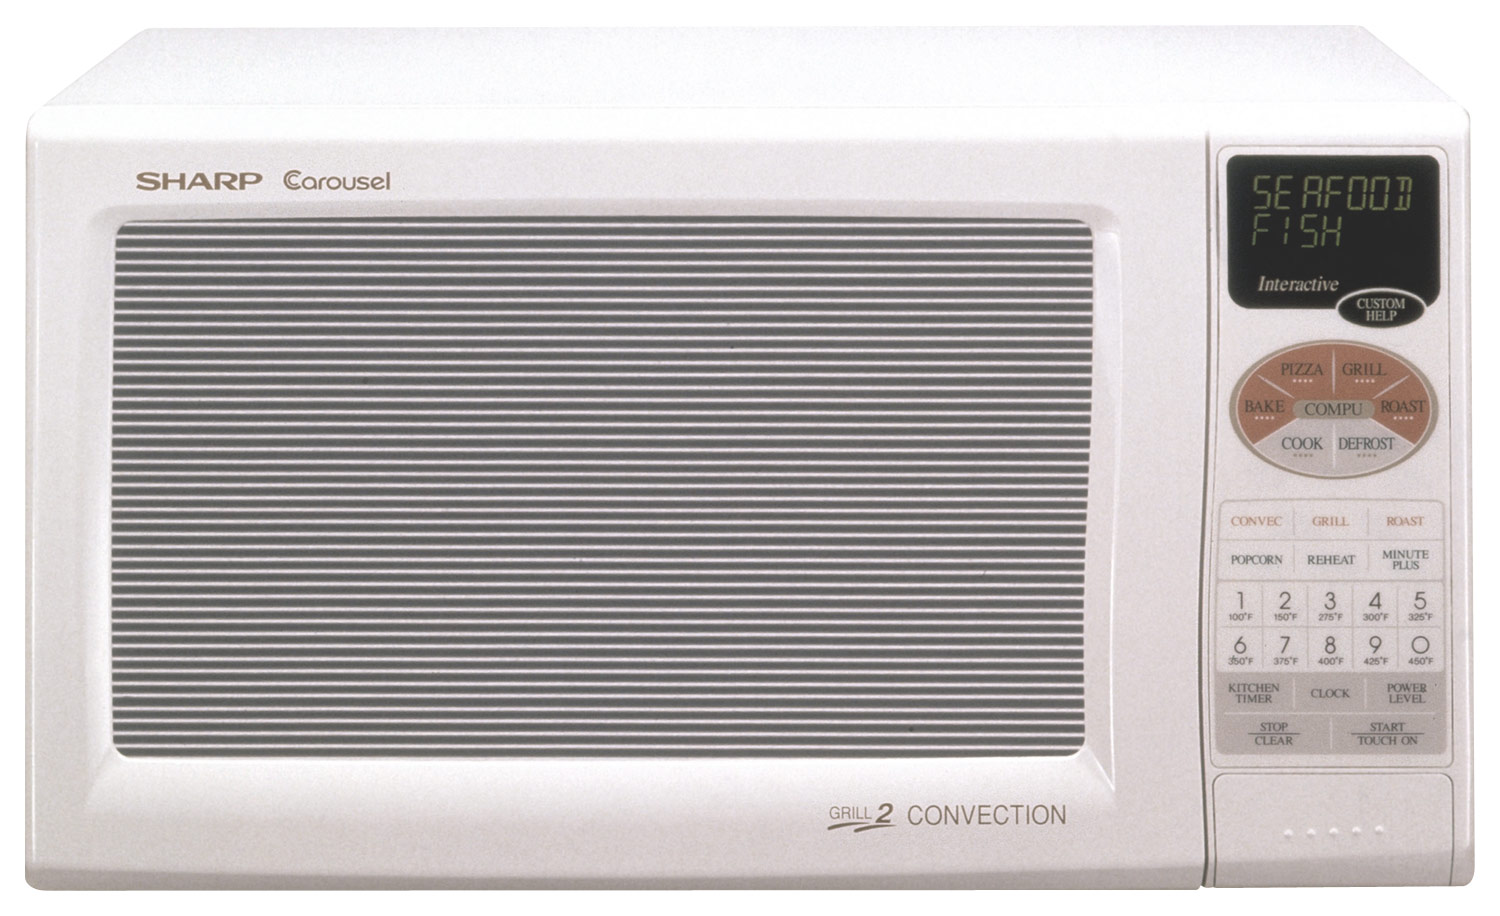  Sharp - R820BW Convection Microwave Oven - White